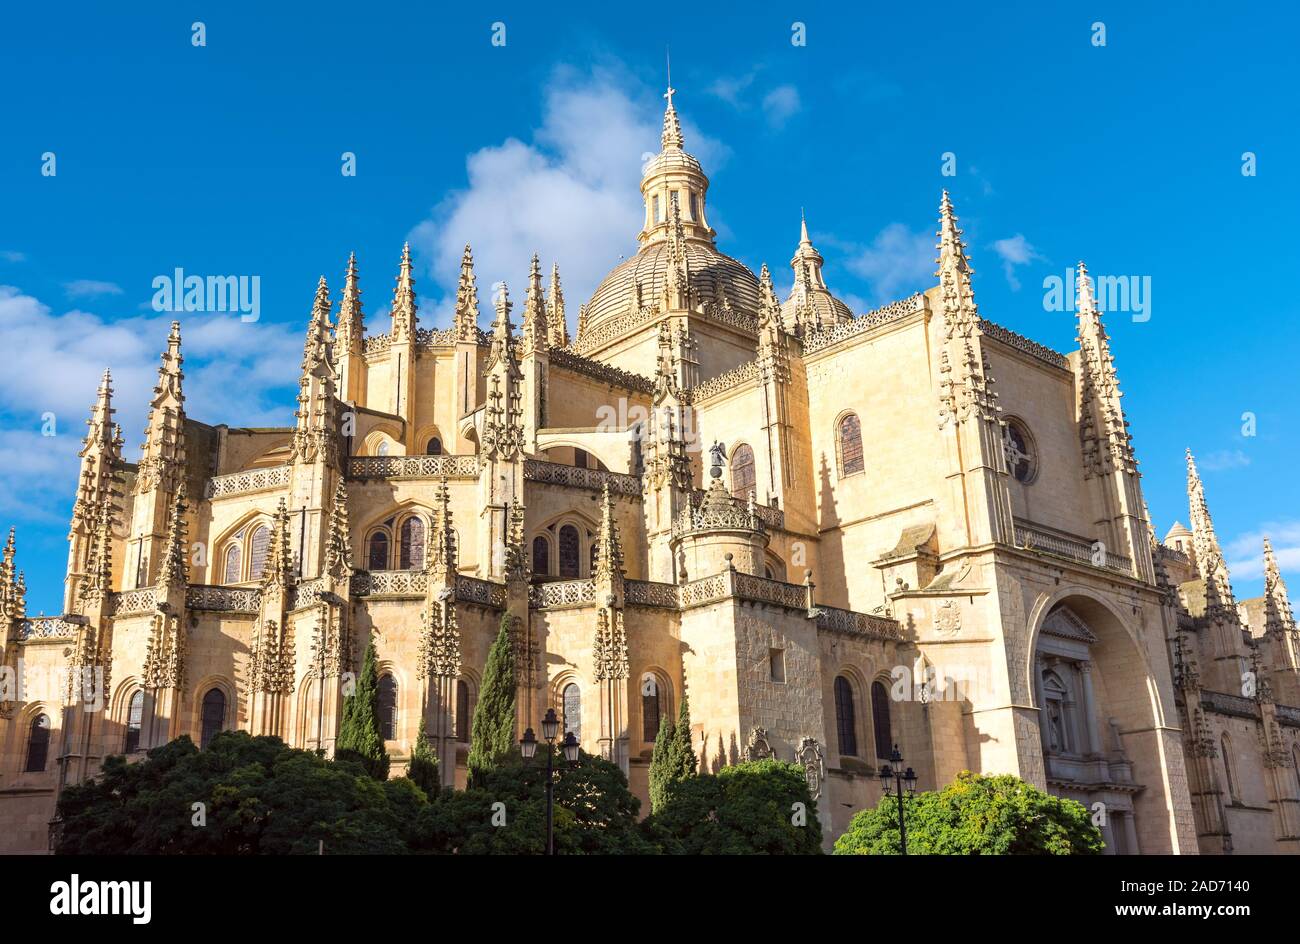 The imposing cathedral of Segovia in Spain Stock Photo